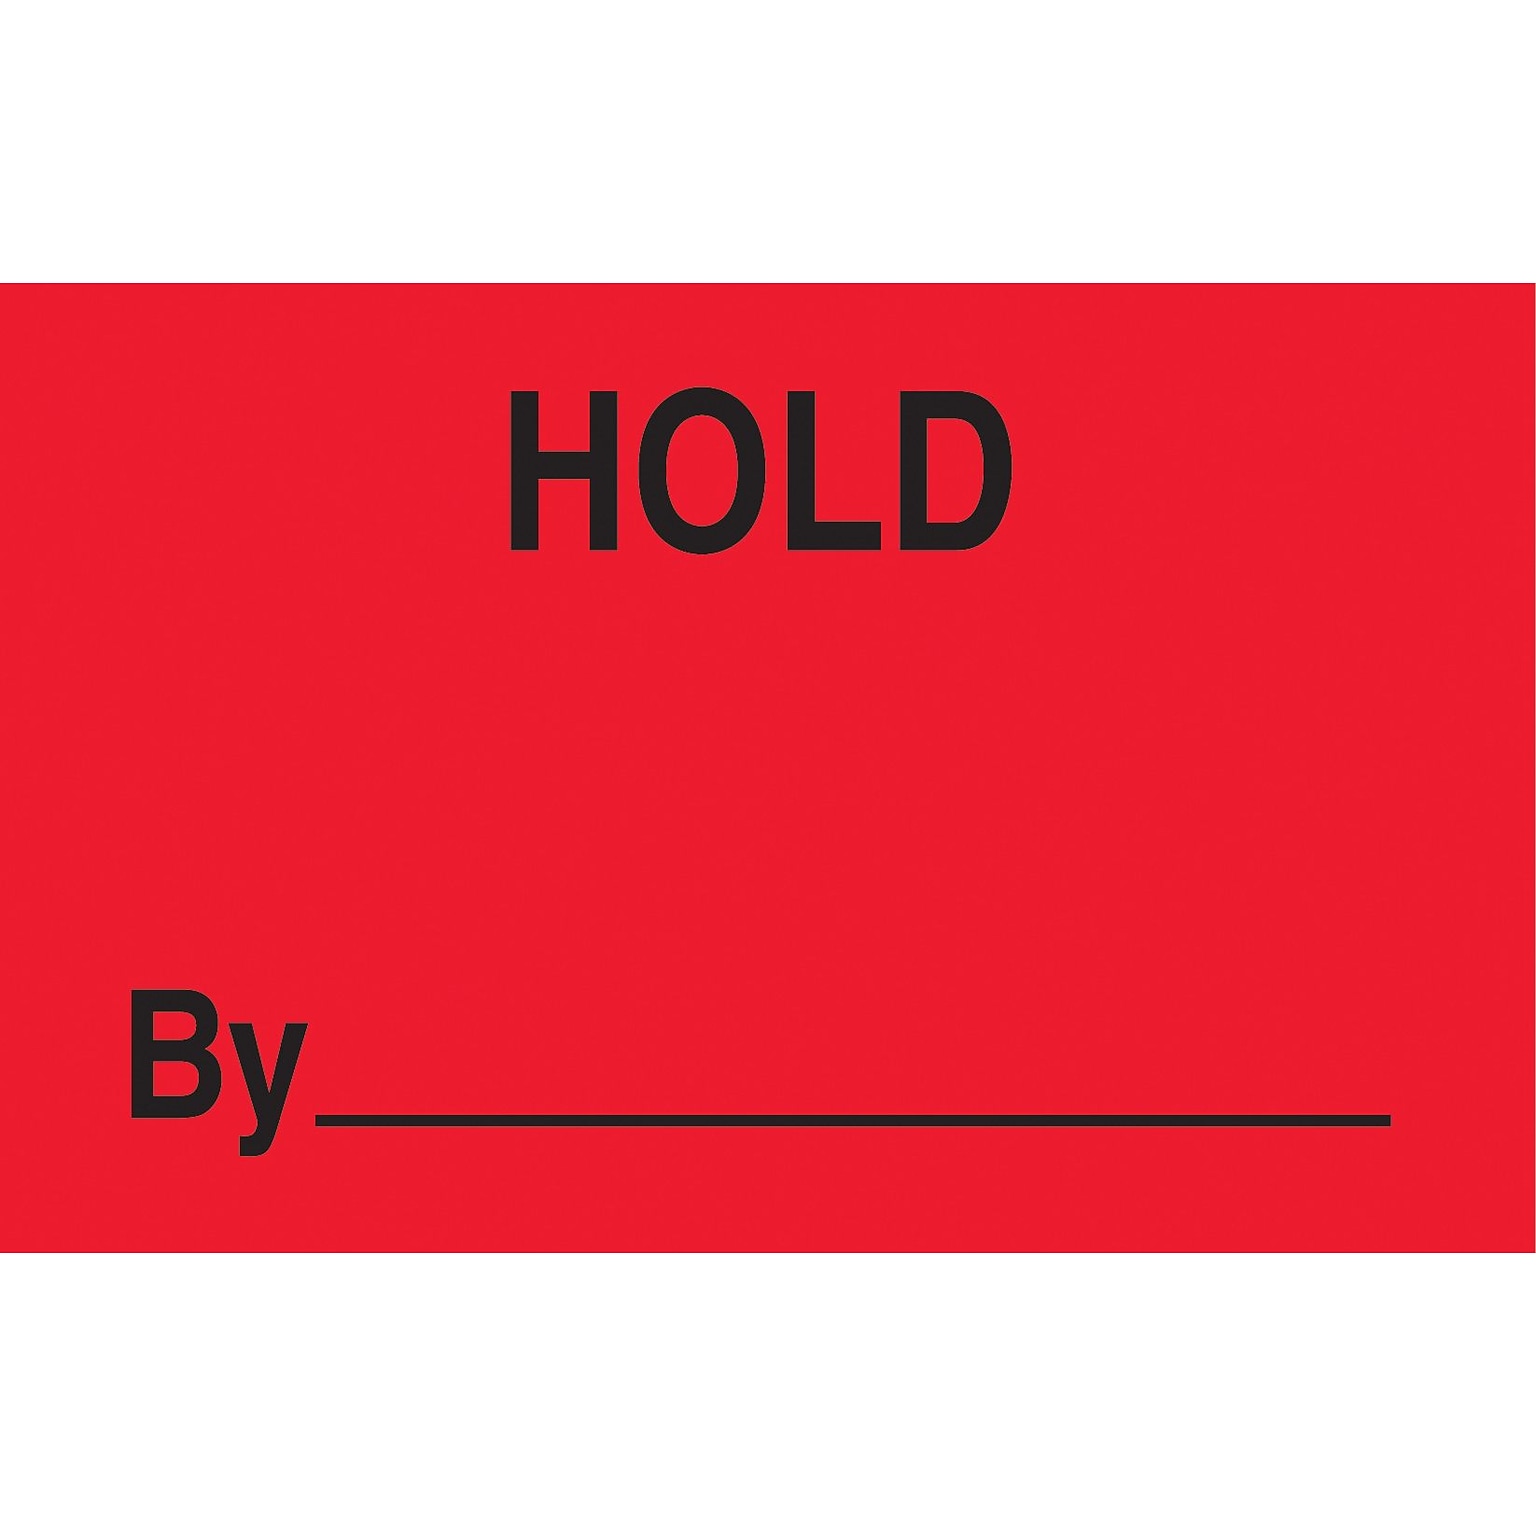 Hold By ________ Labels, Red/Black, 5 x 3, 500/Rl